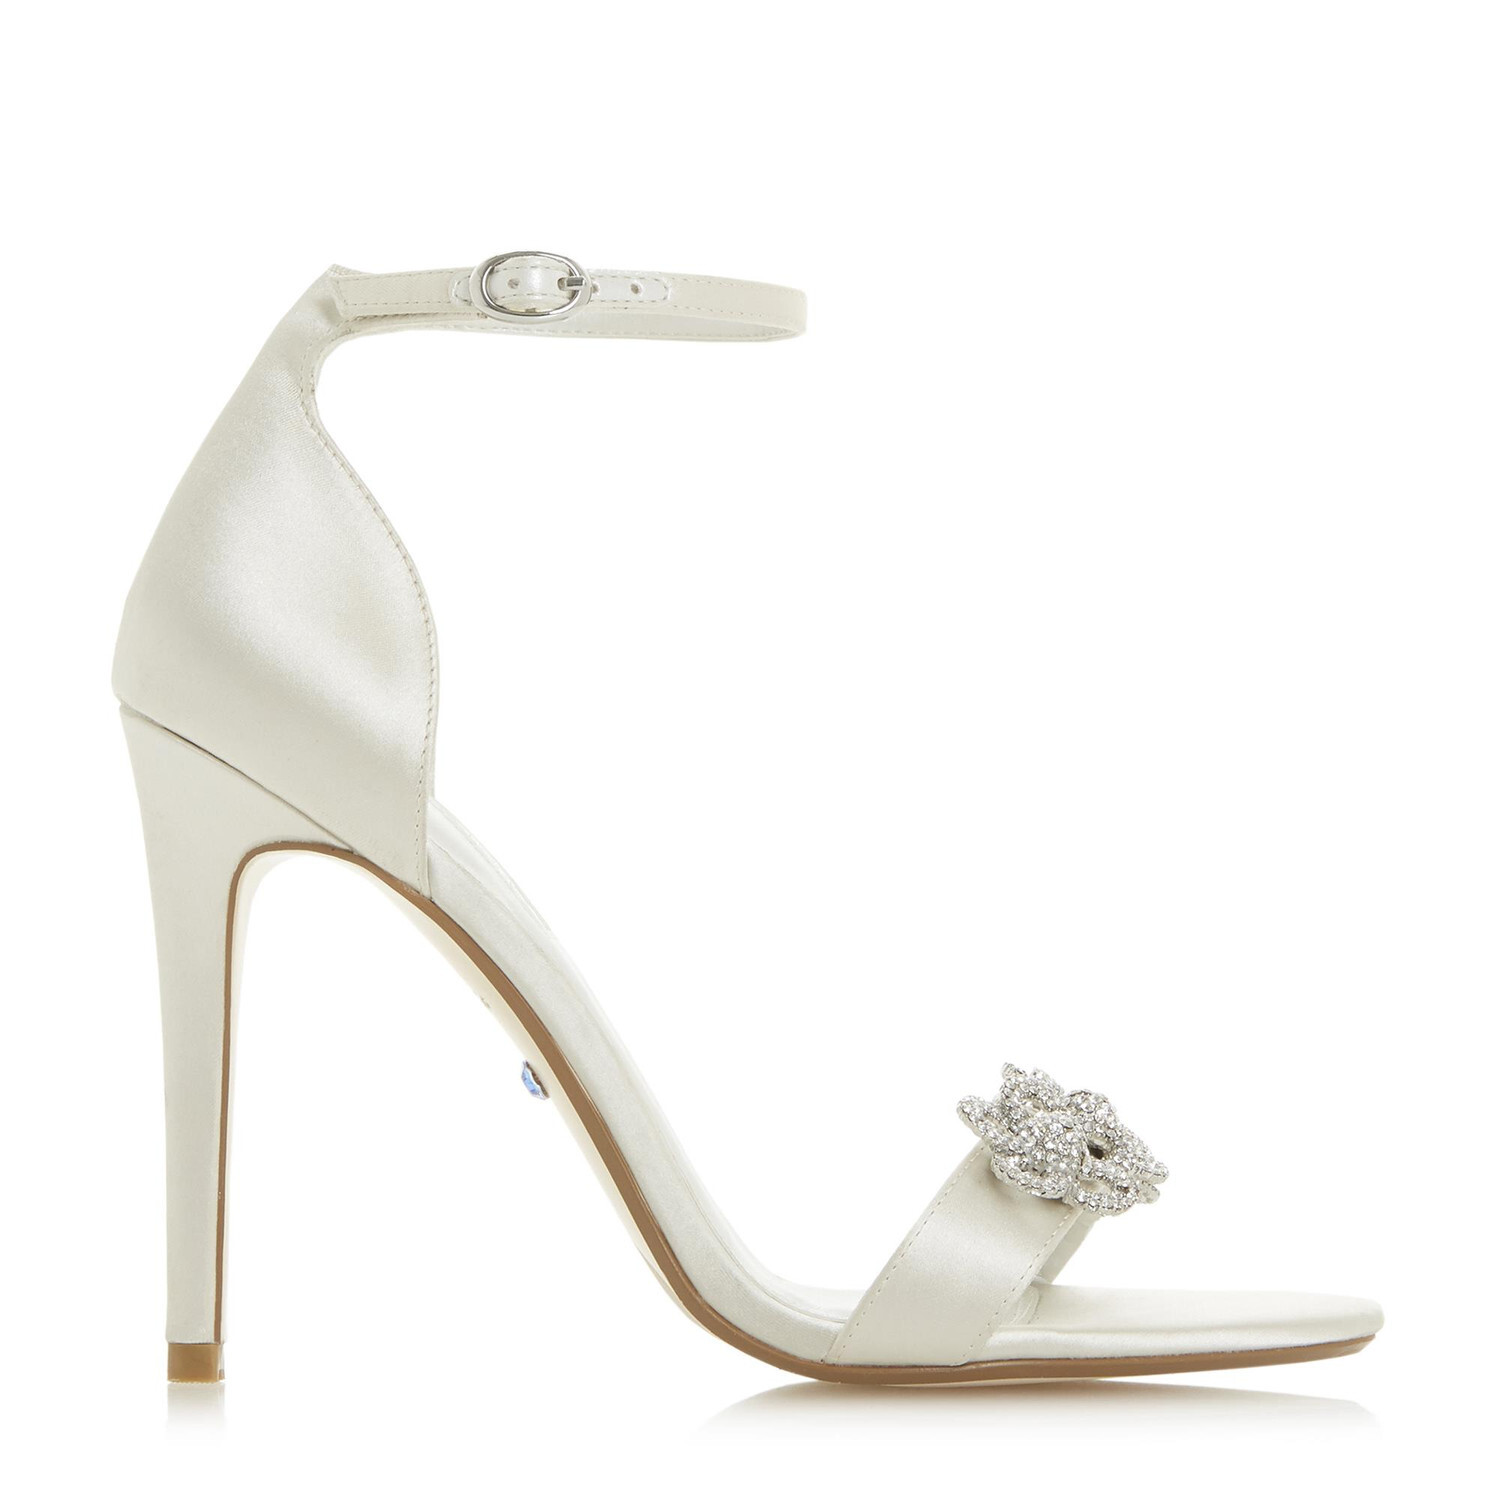 Marry Me Wedding Shoes from Dune London - hitched.co.uk